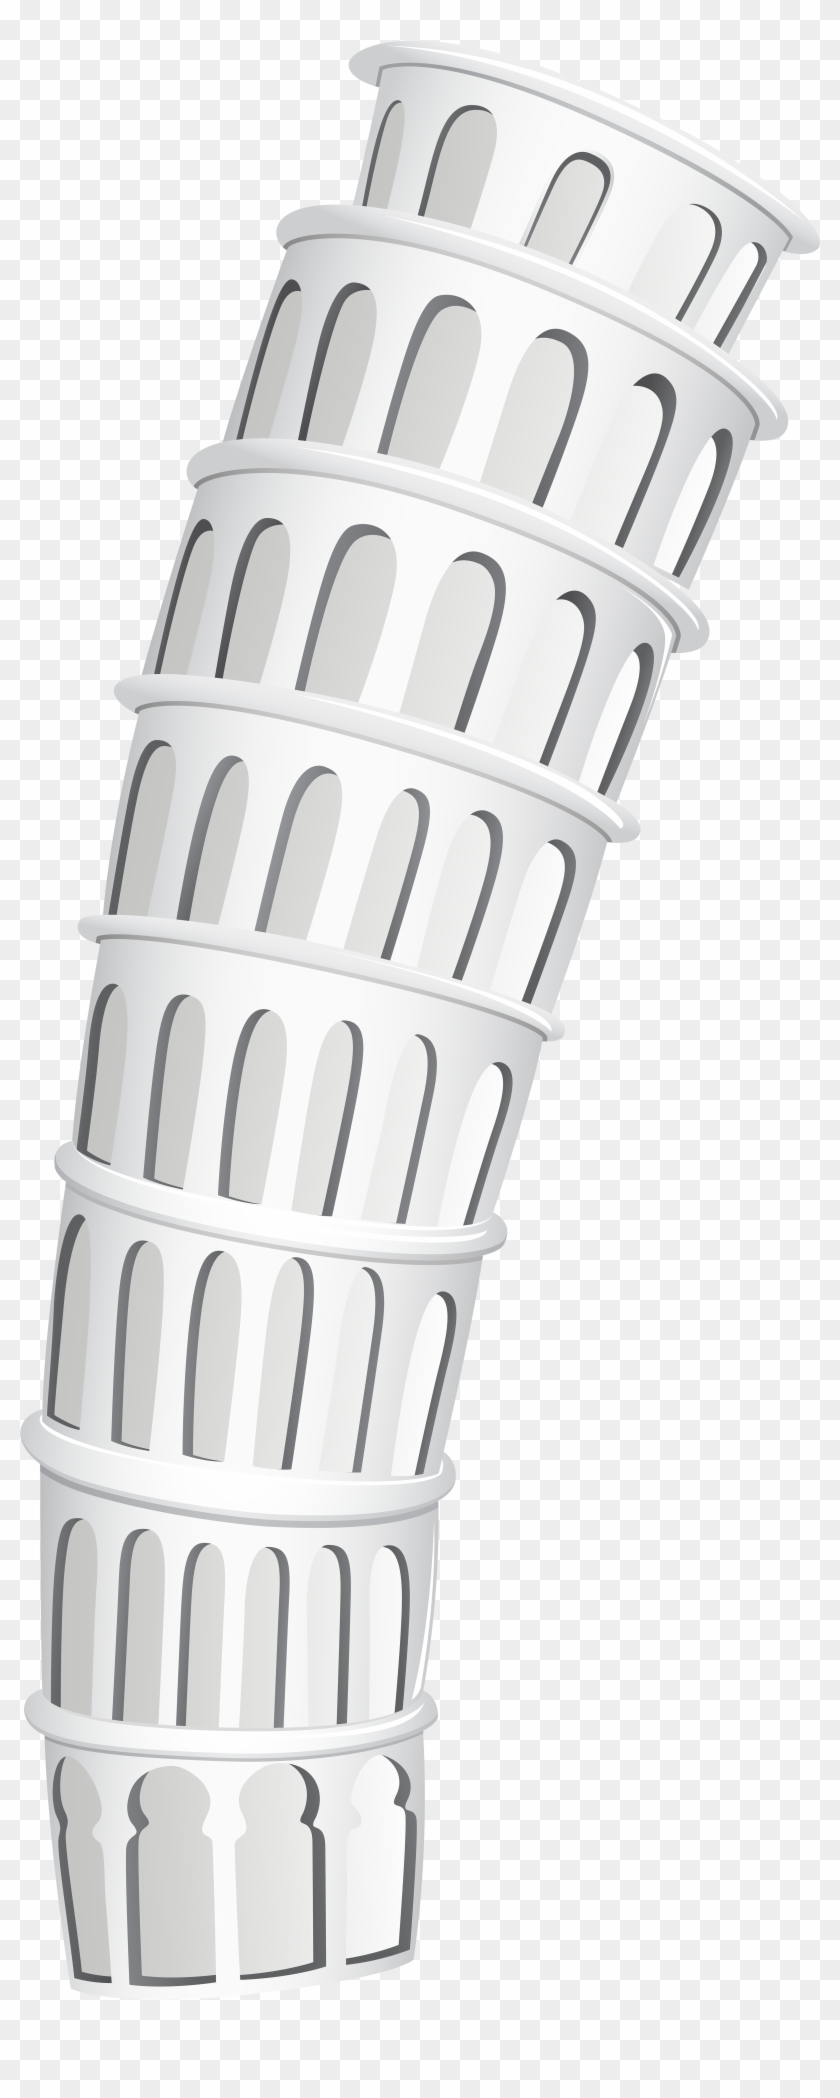 Leaning Tower Of Pisa Png Clip Art - Architecture Transparent Png #1690319